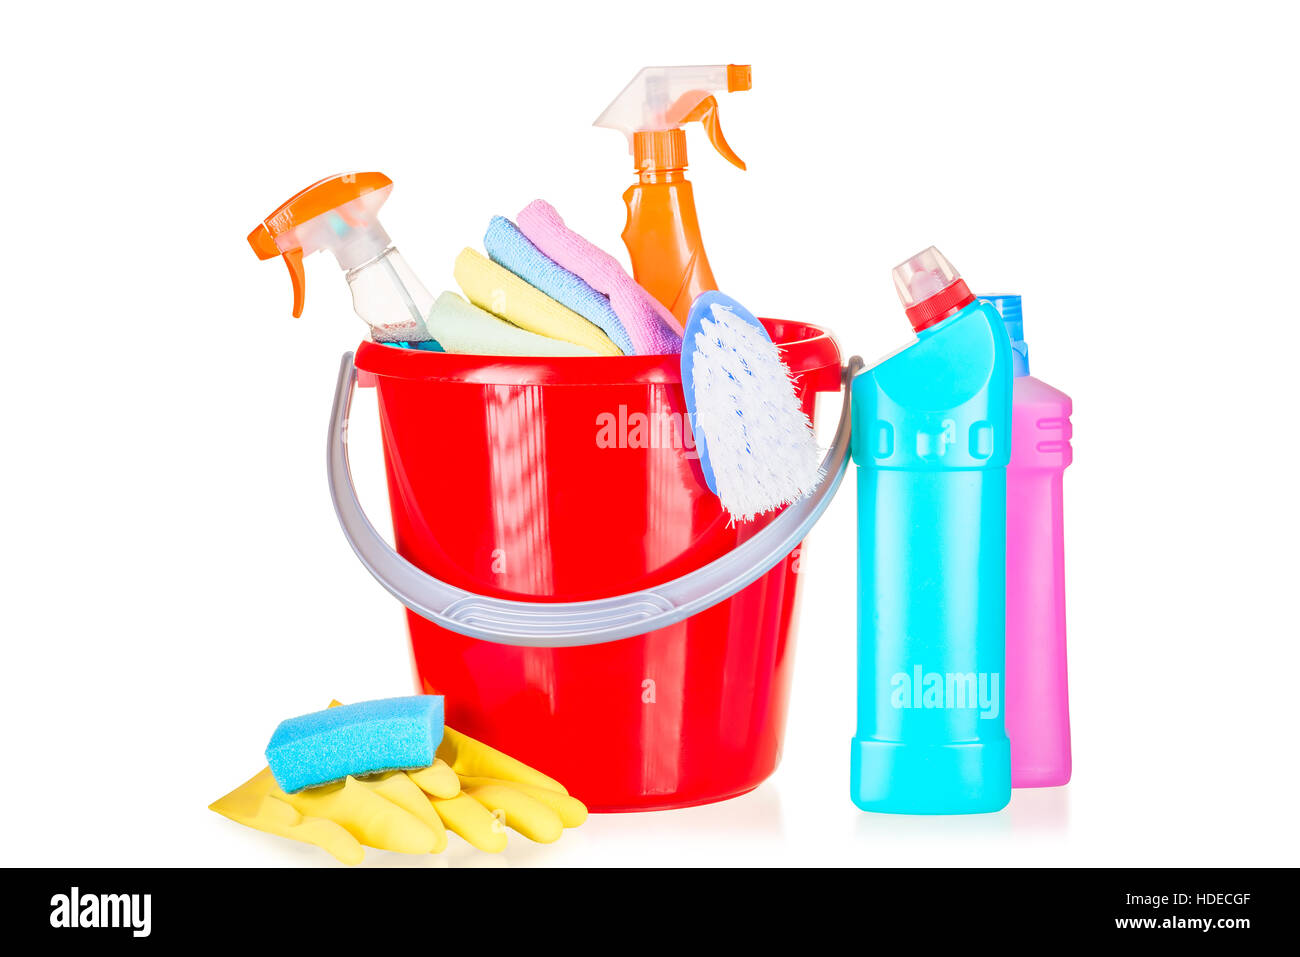 Household items Cut Out Stock Images & Pictures - Alamy